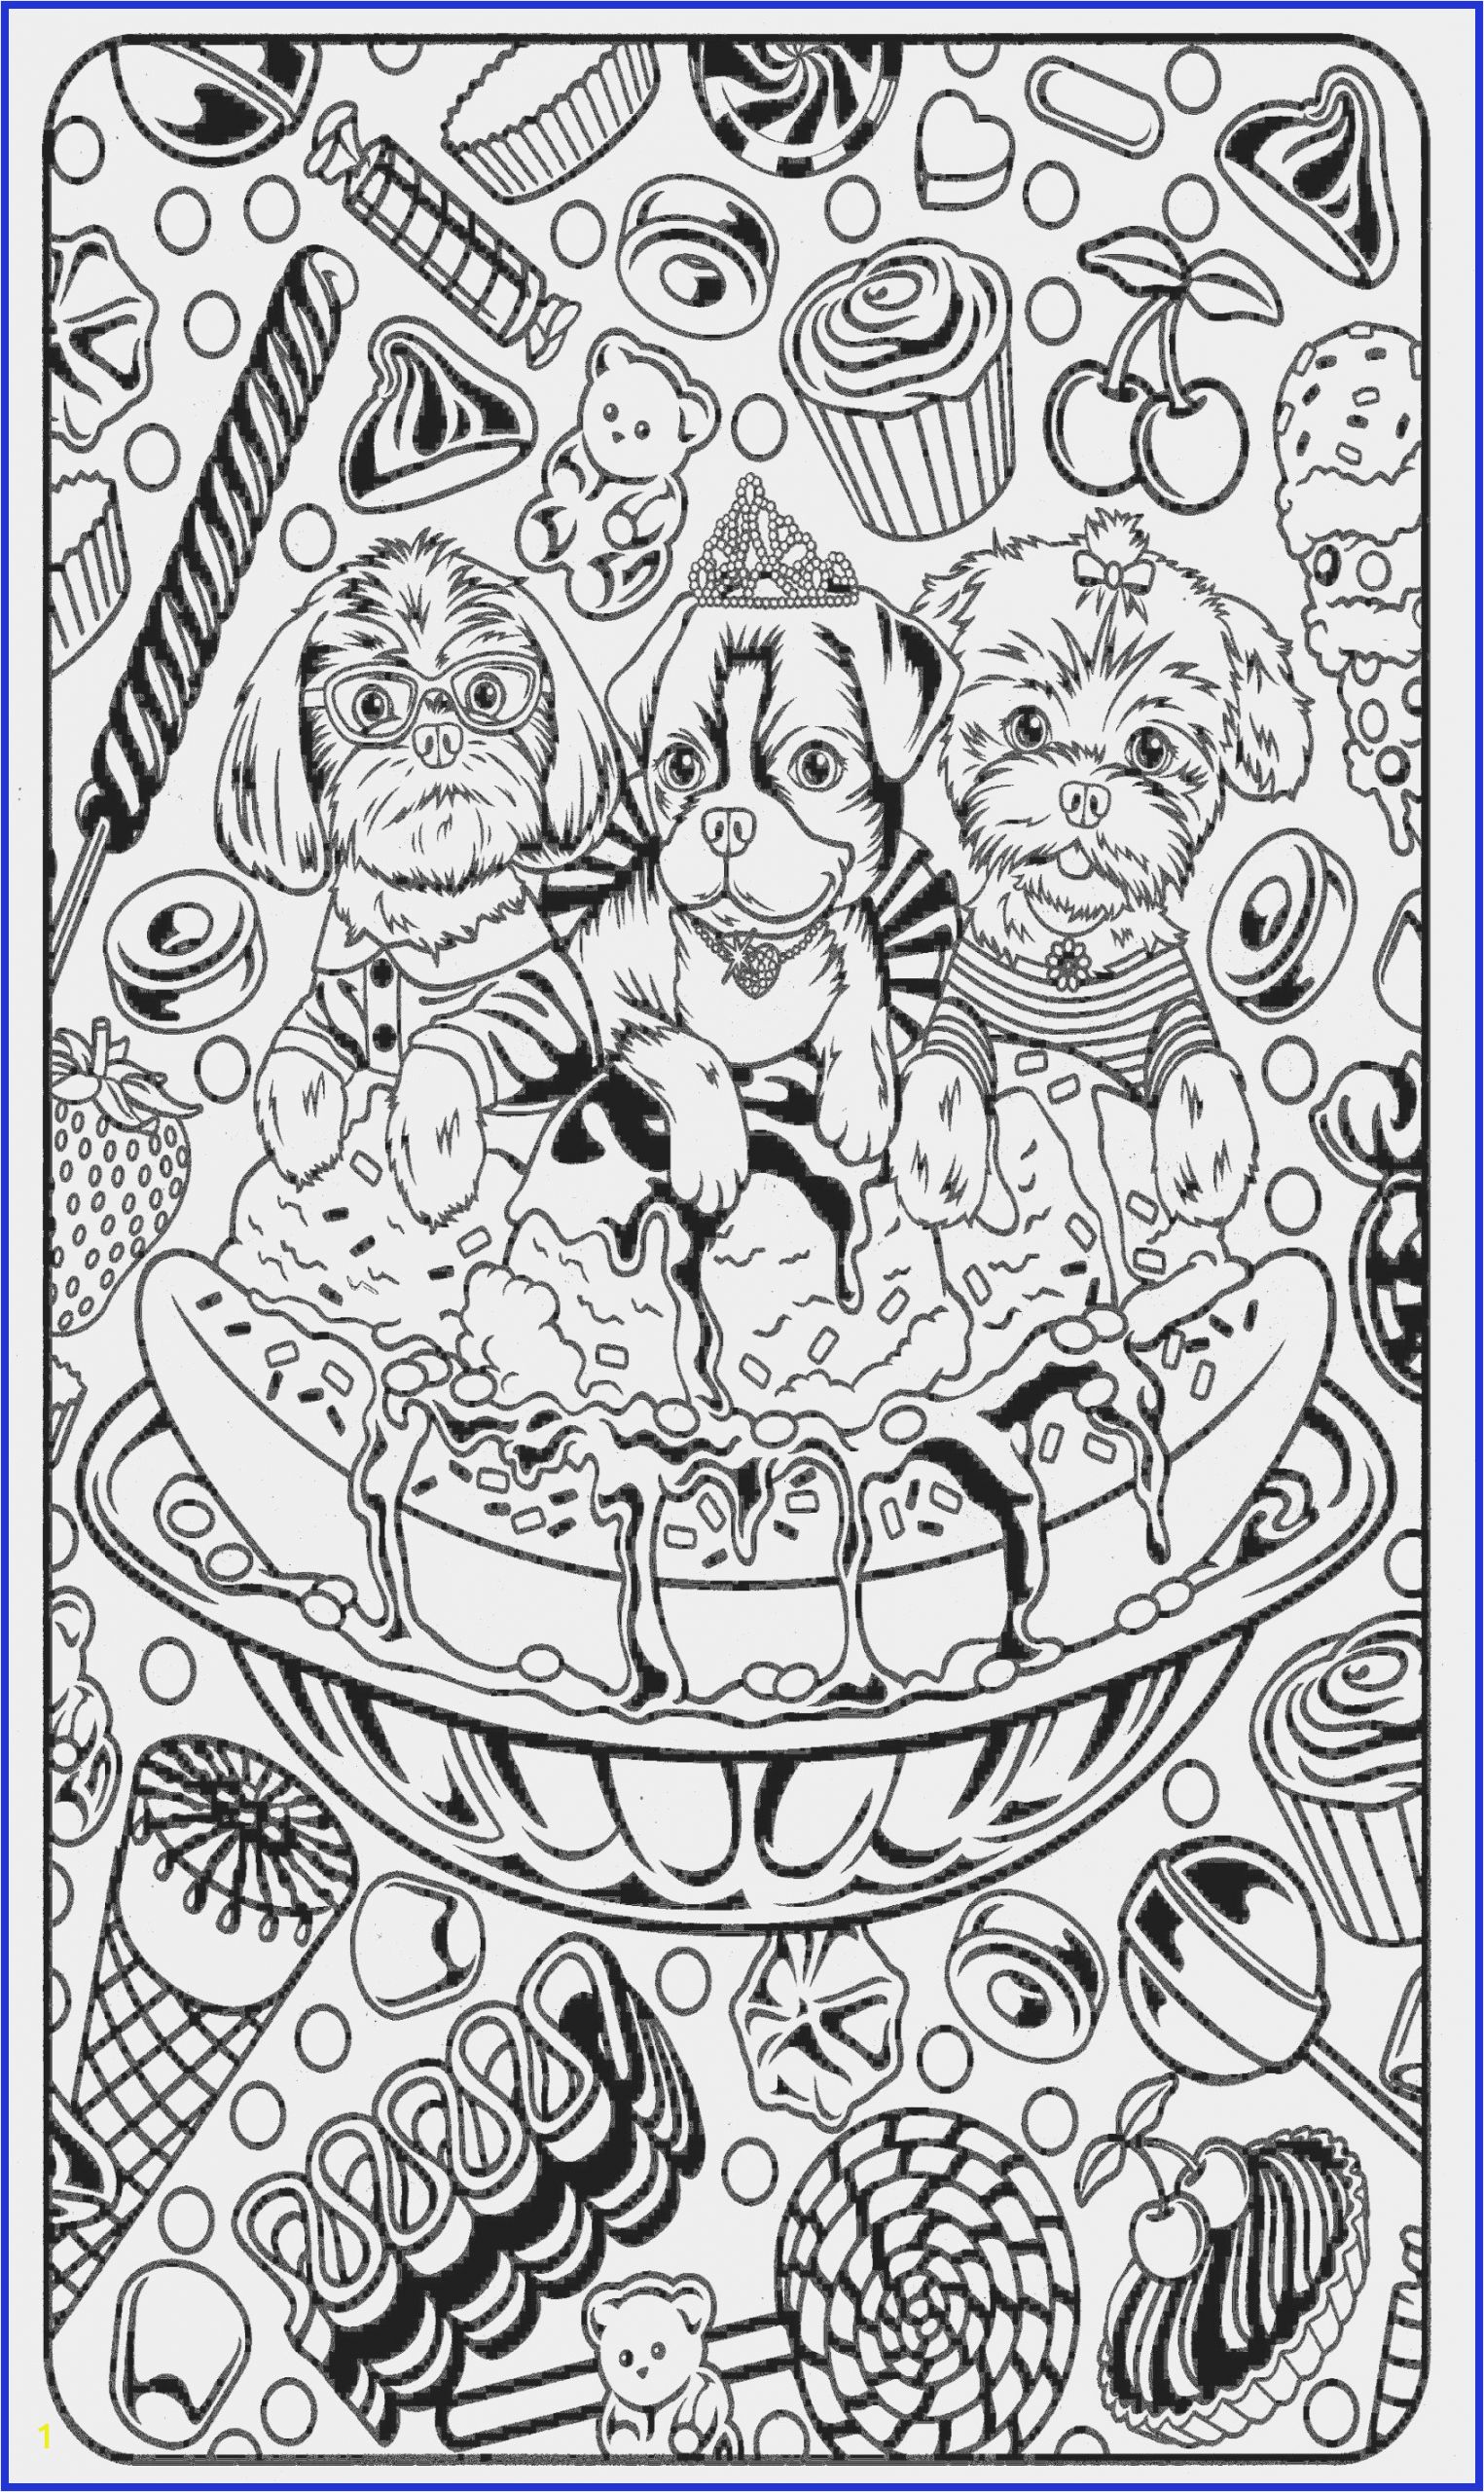 coloring page for free to print best of gallery gymnastics coloring page kiss coloring pages free summer coloring of coloring page for free to print